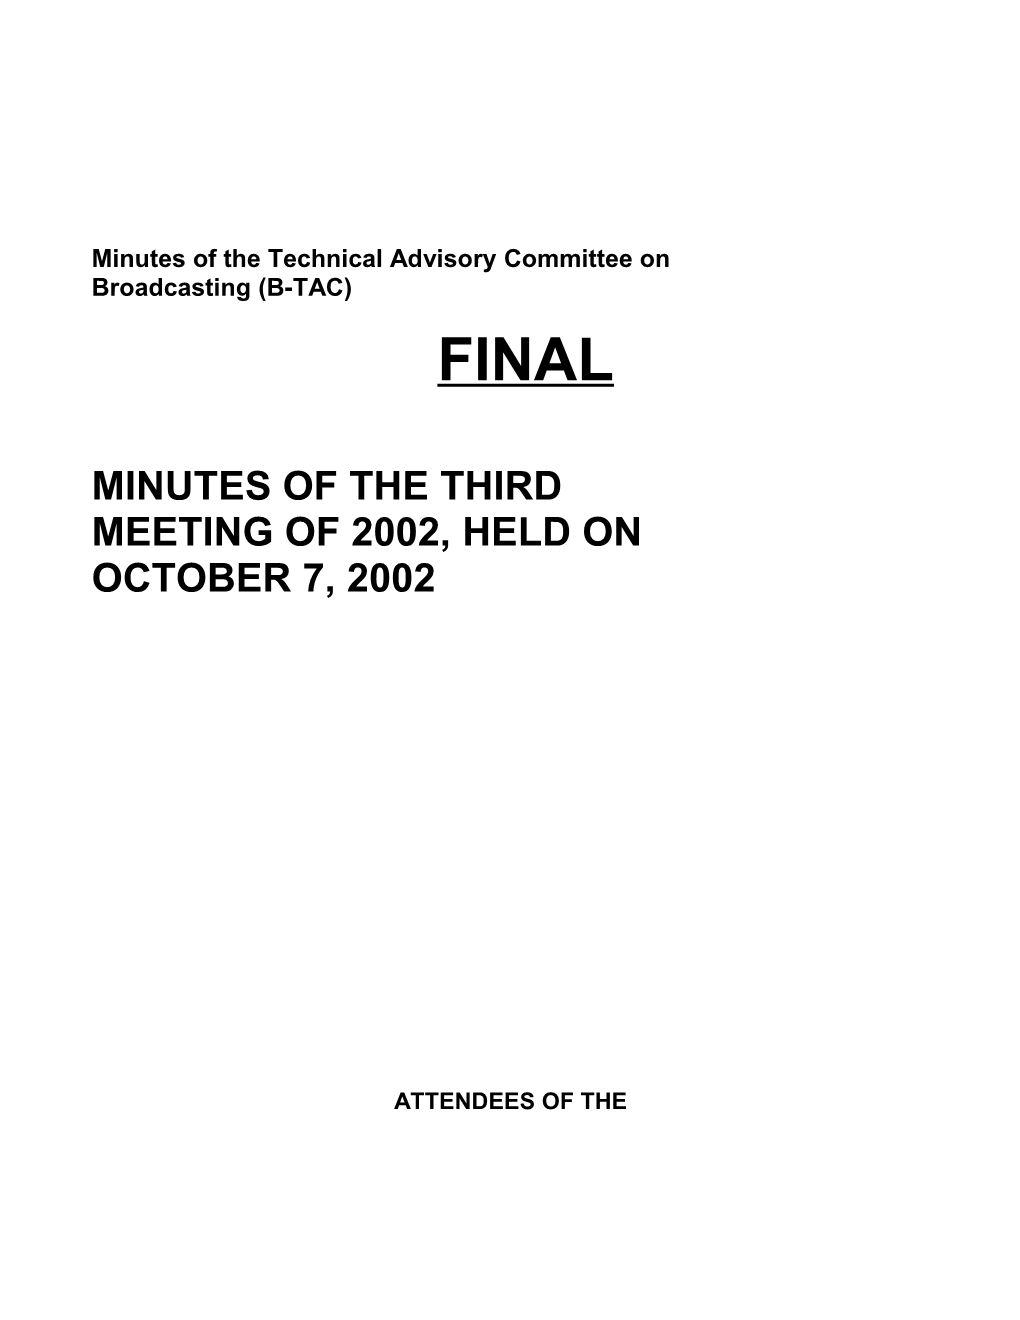 Minutes of the Technical Advisory Committee on Broadcasting (B-TAC)